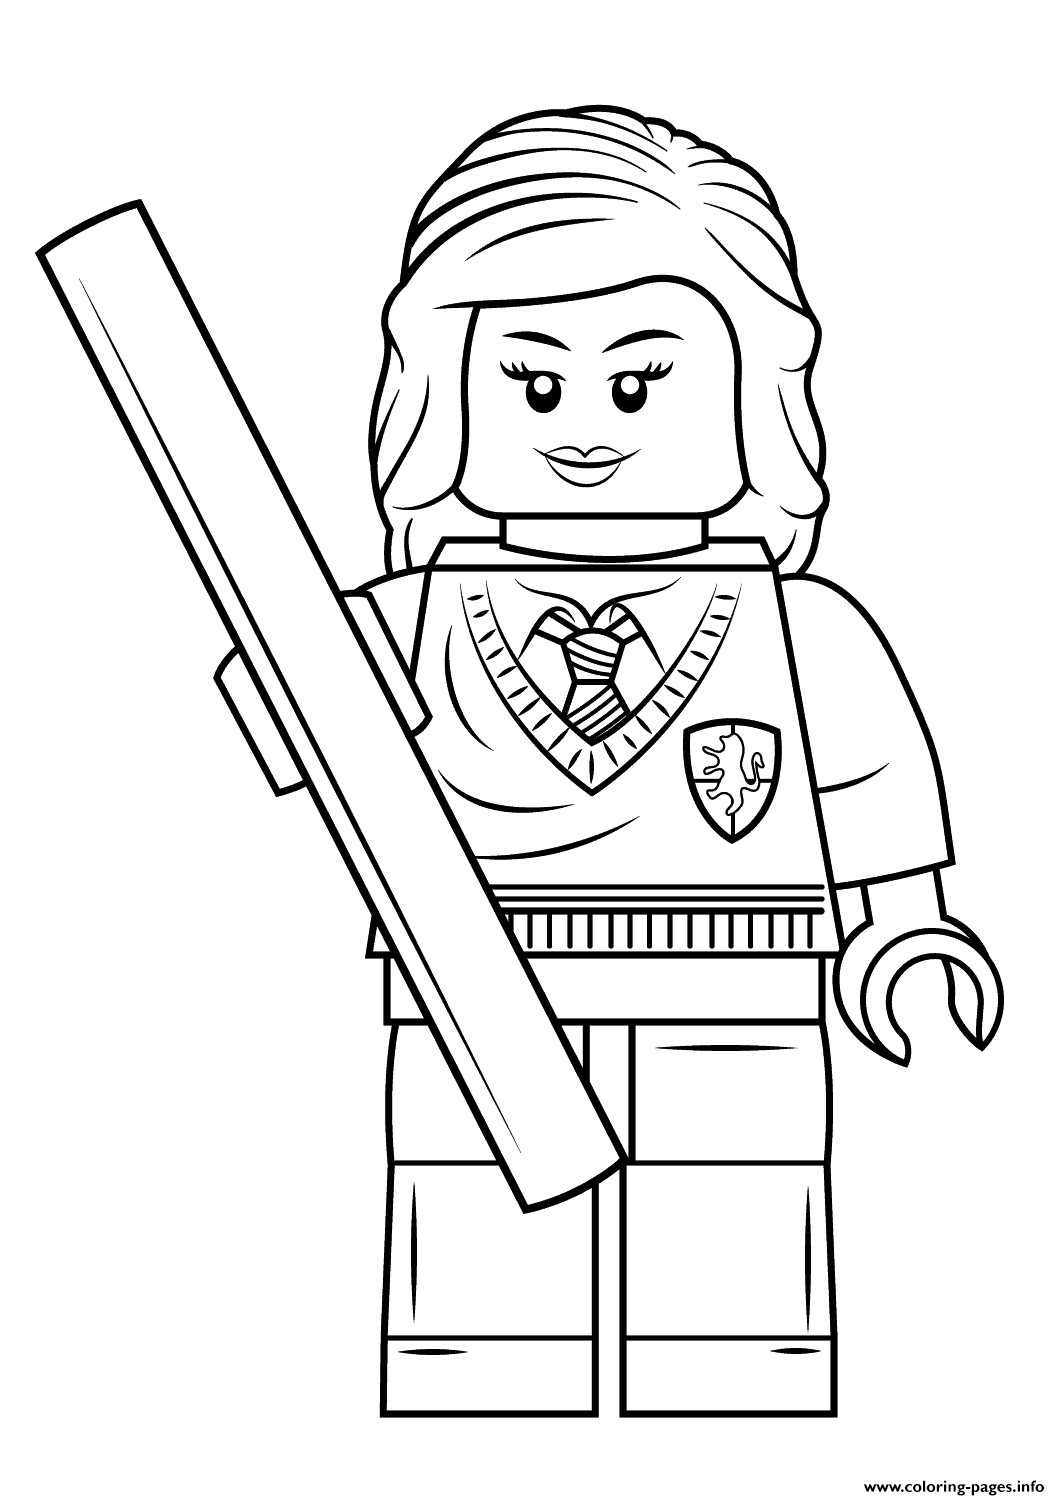 Harry Potter Coloring Pages For Kids at GetColoringscom